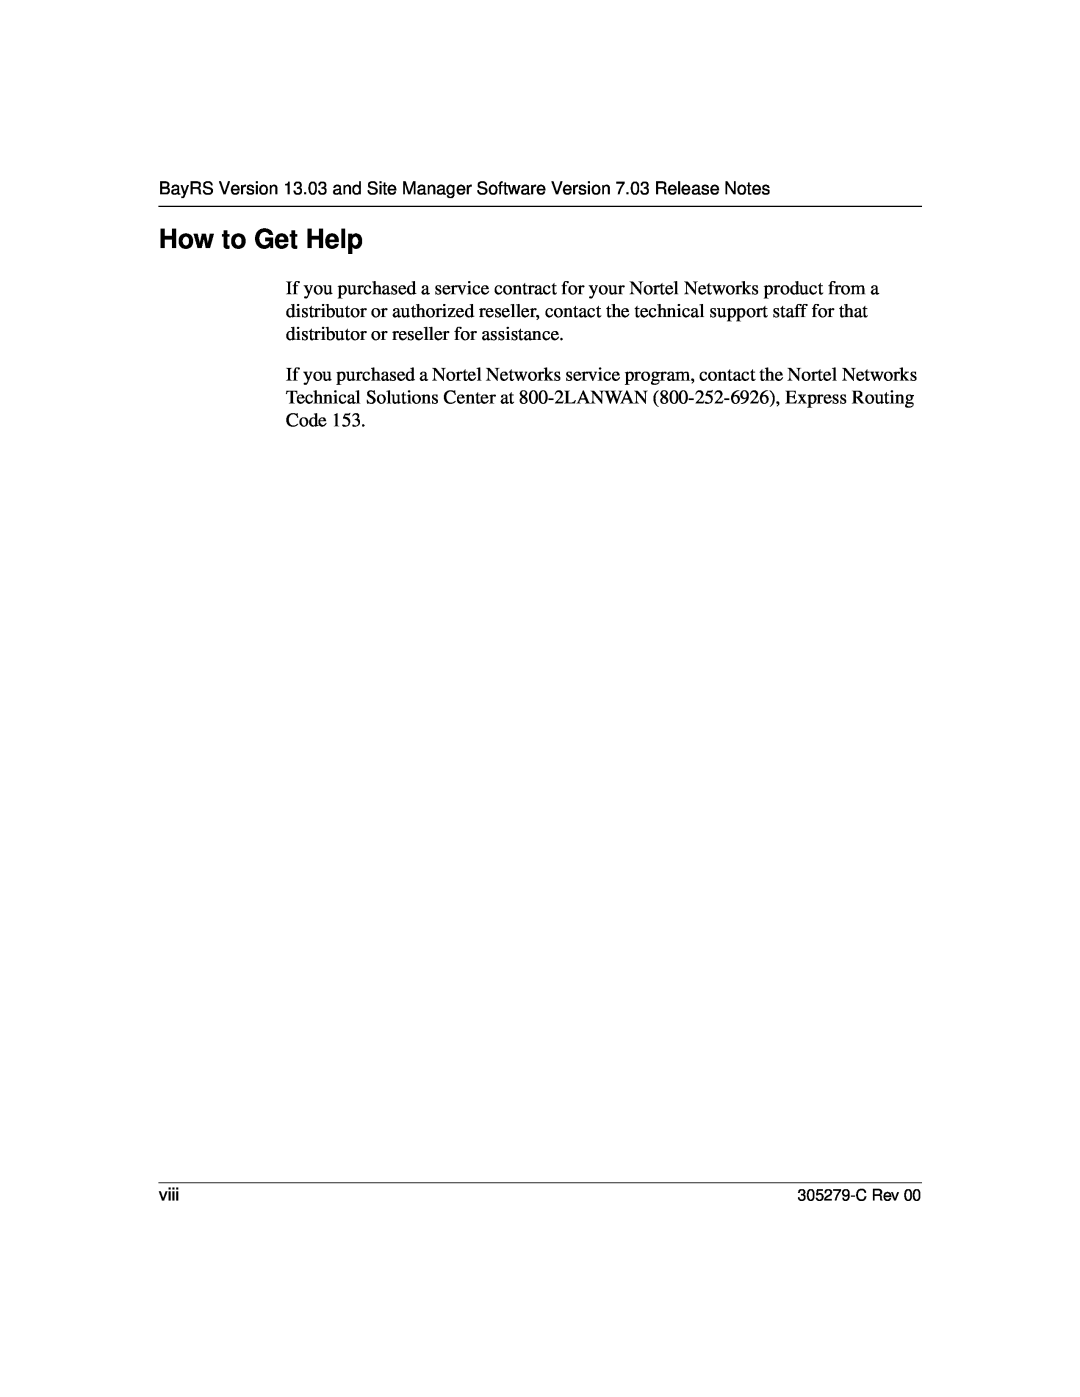 Nortel Networks 13.03 manual How to Get Help, viii 